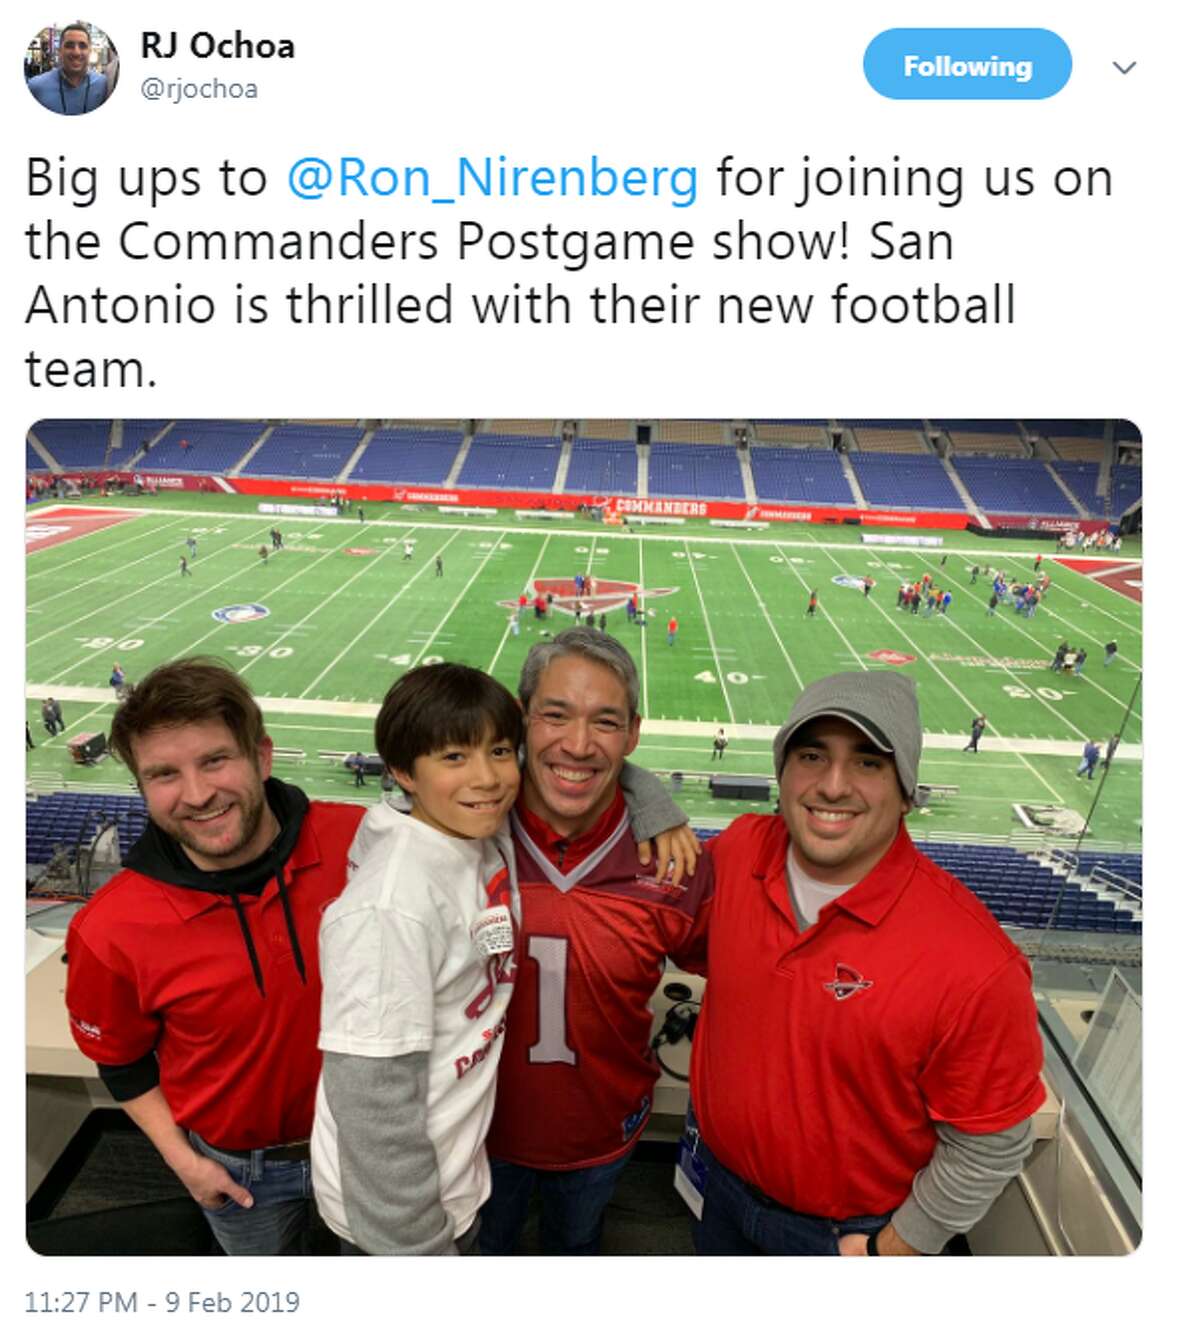 @rjochoa: Big ups to @Ron_Nirenberg for joining us on the Commanders Postgame show! San Antonio is thrilled with their new football team.